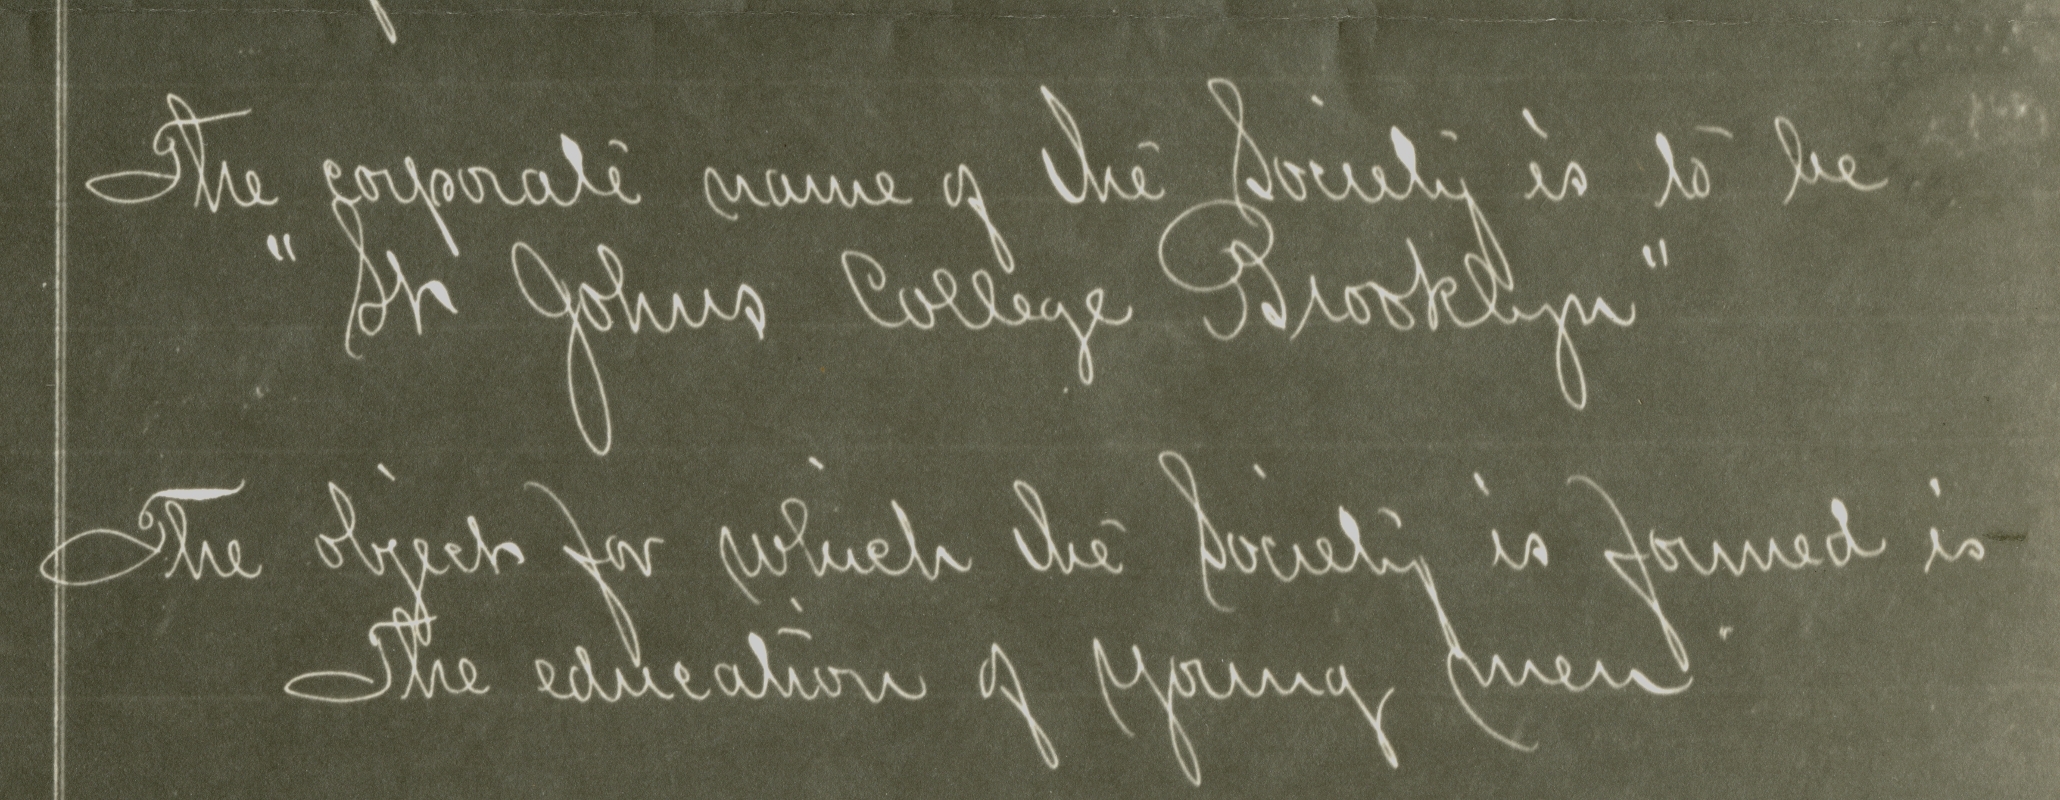 Excerpt from the charter of St. John's College, September 1, 1871.